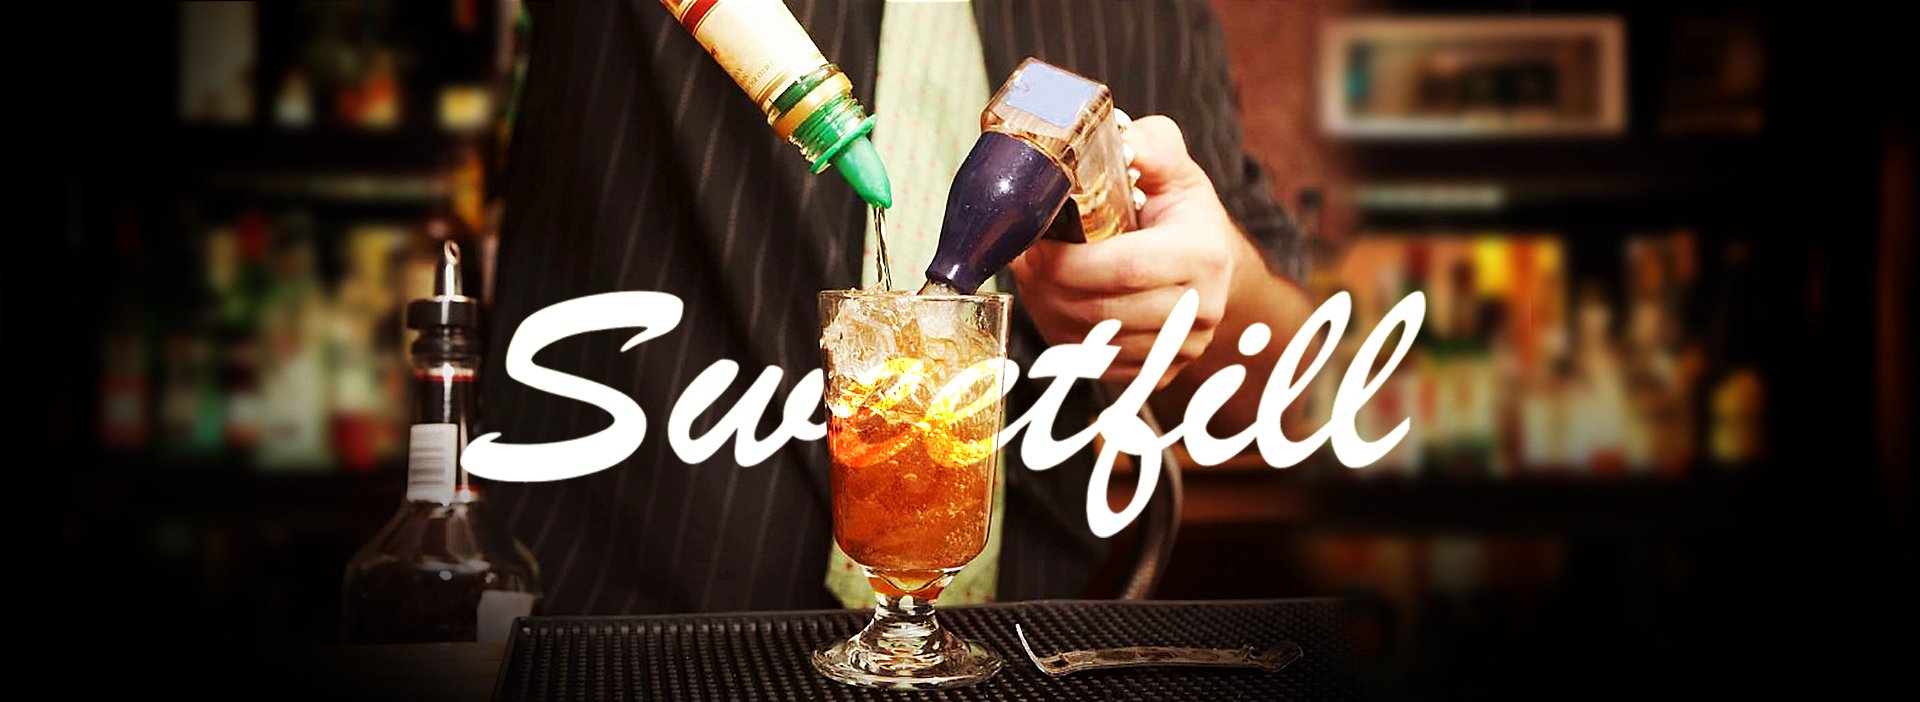 Cocktails sweetfill